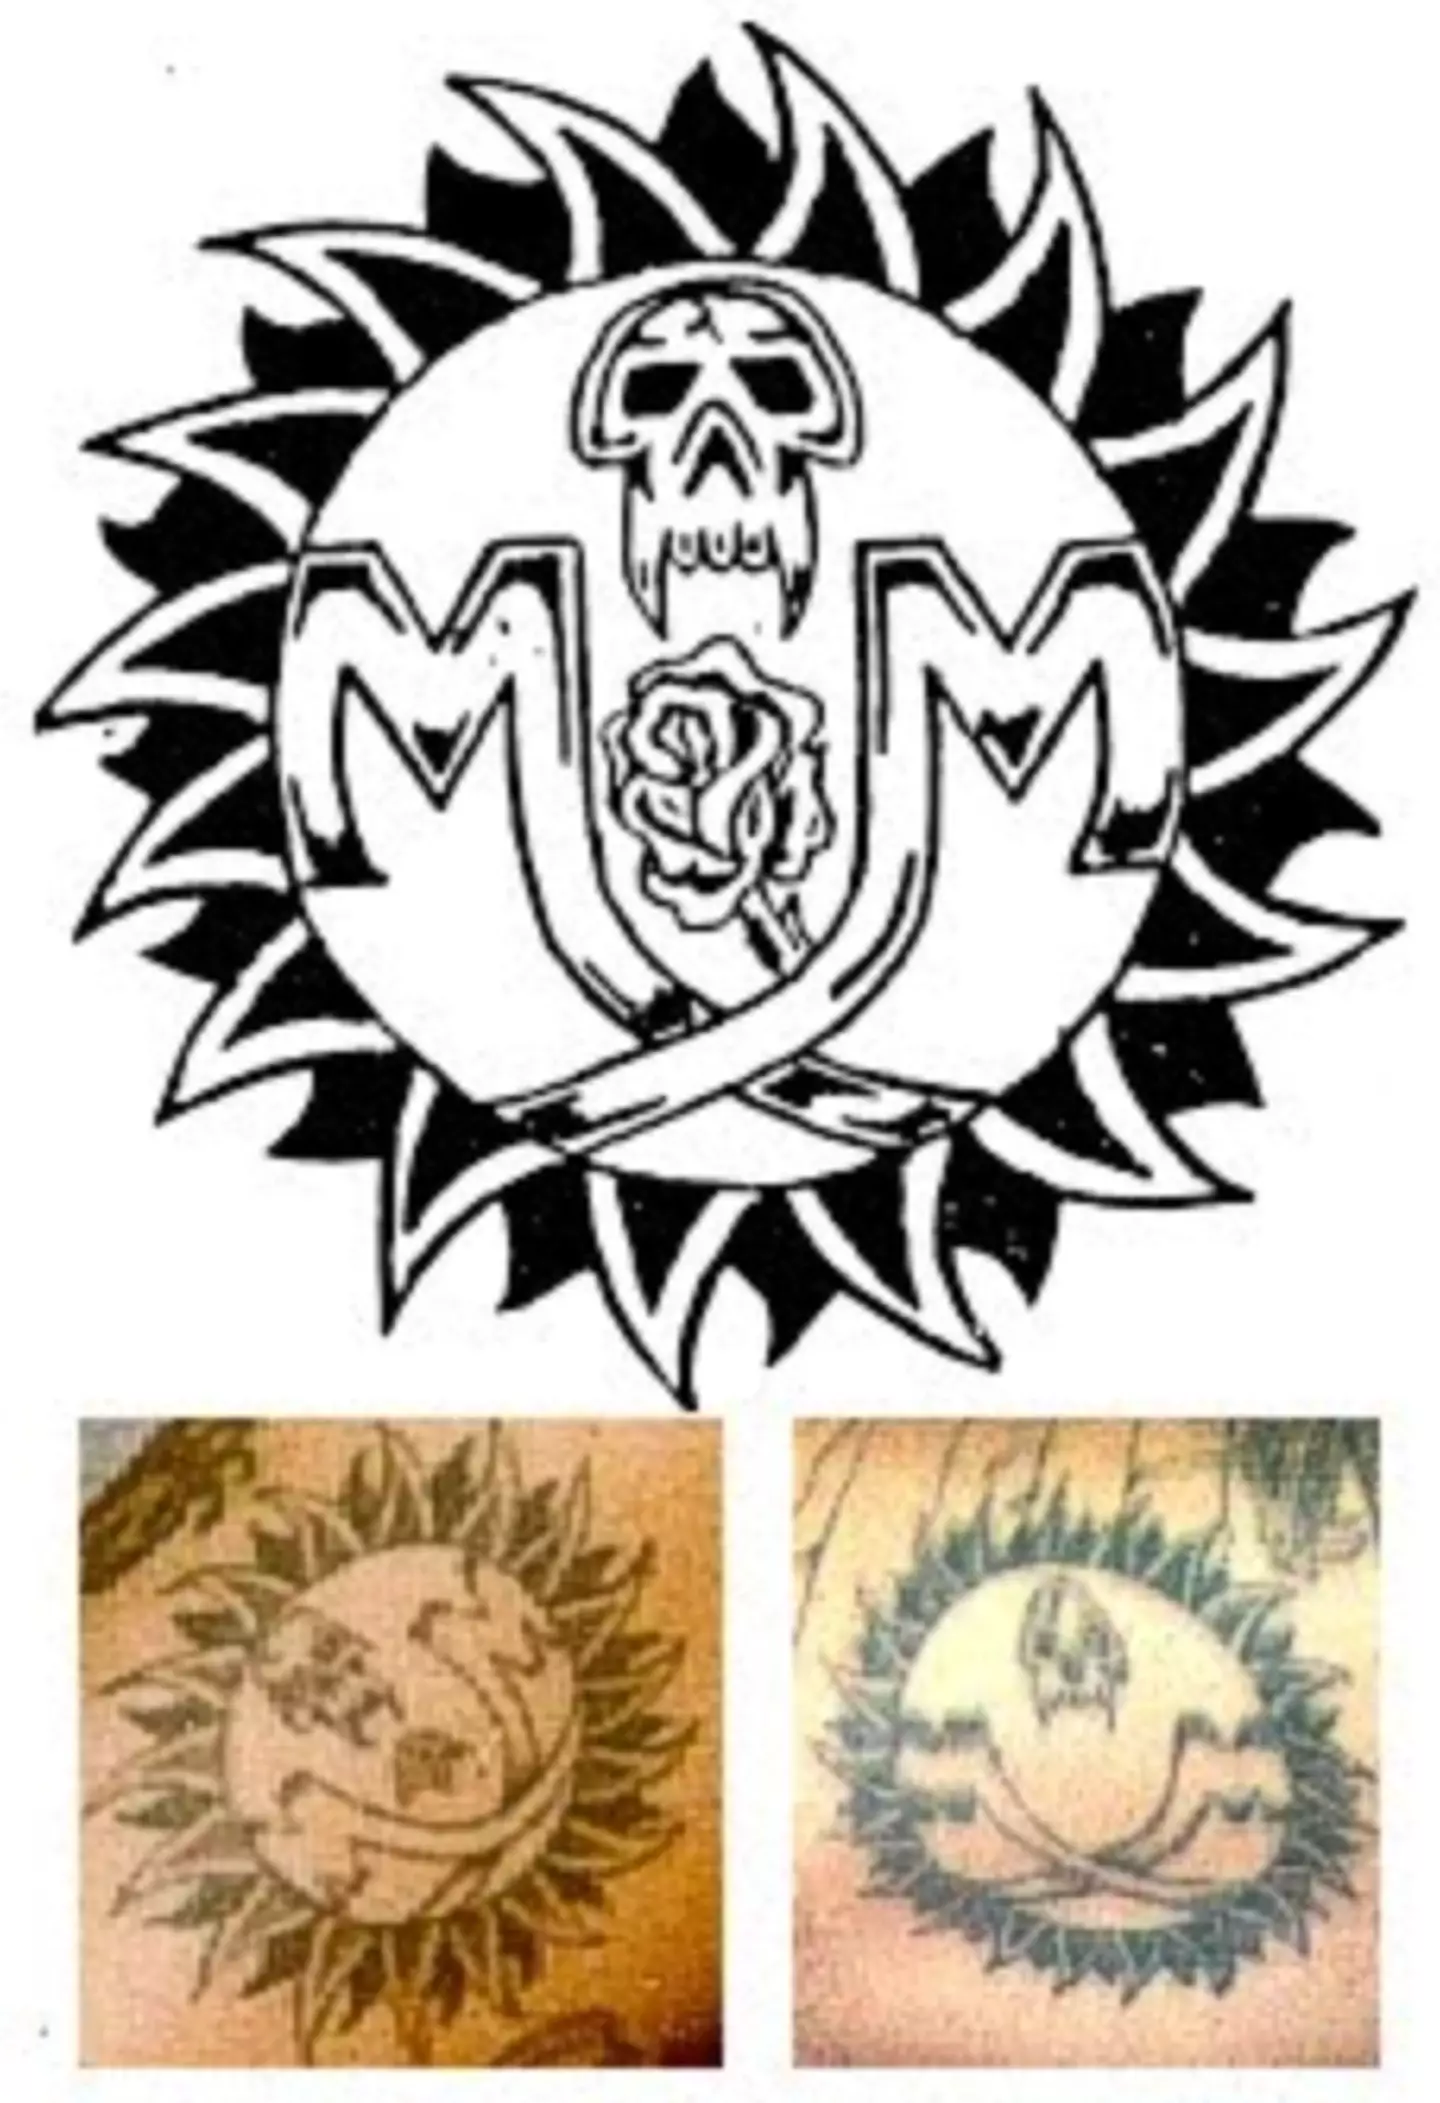 The tattoo, or ‘patch’, worn by members of the AZ Mexican Mafia.